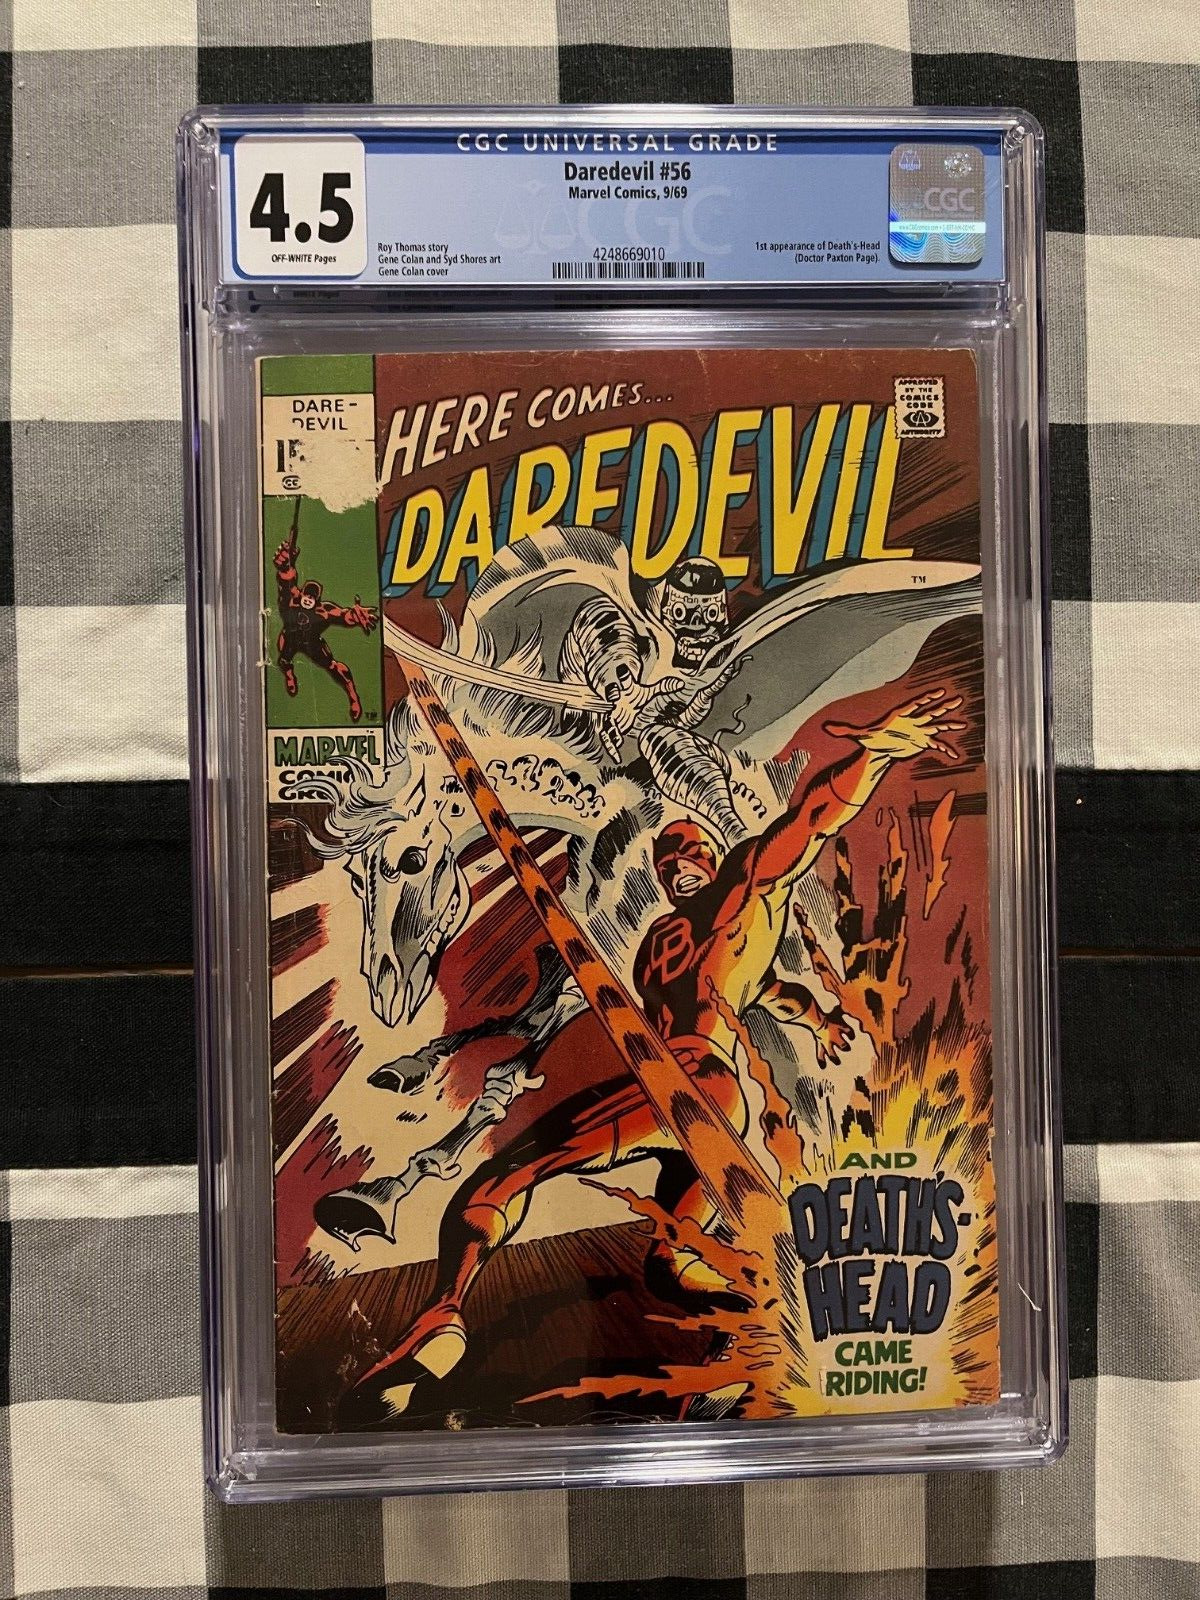 DAREDEVIL #56 CGC 4.5 1ST APP OF DEATHS HEAD Daredevil Attacked Action Cover